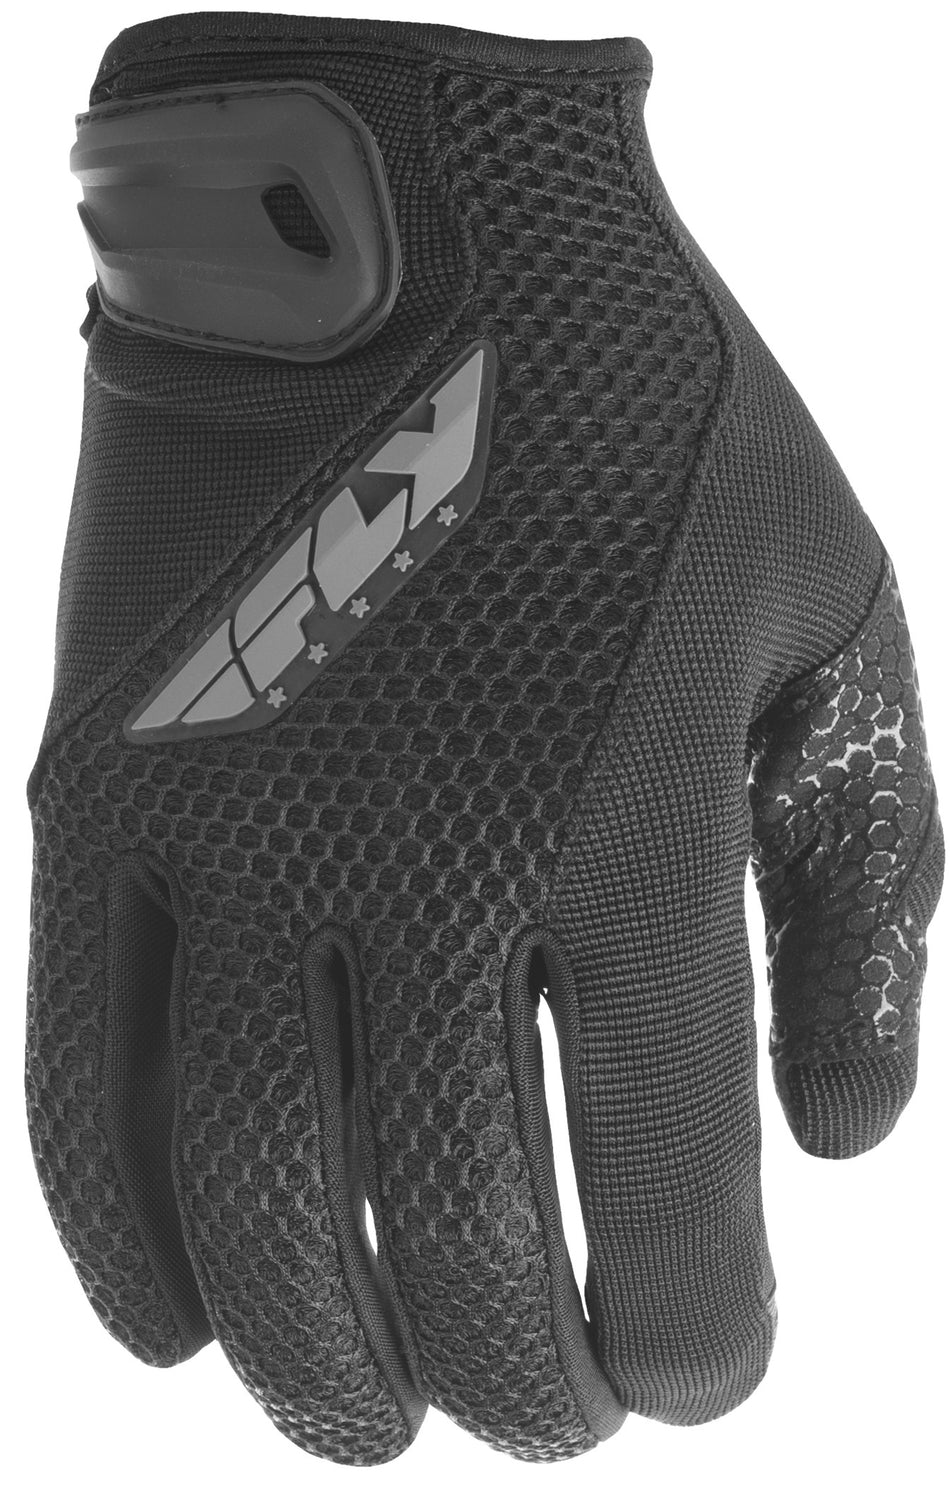 FLY RACING Coolpro Gloves Black Sm #5884 476-4020~2